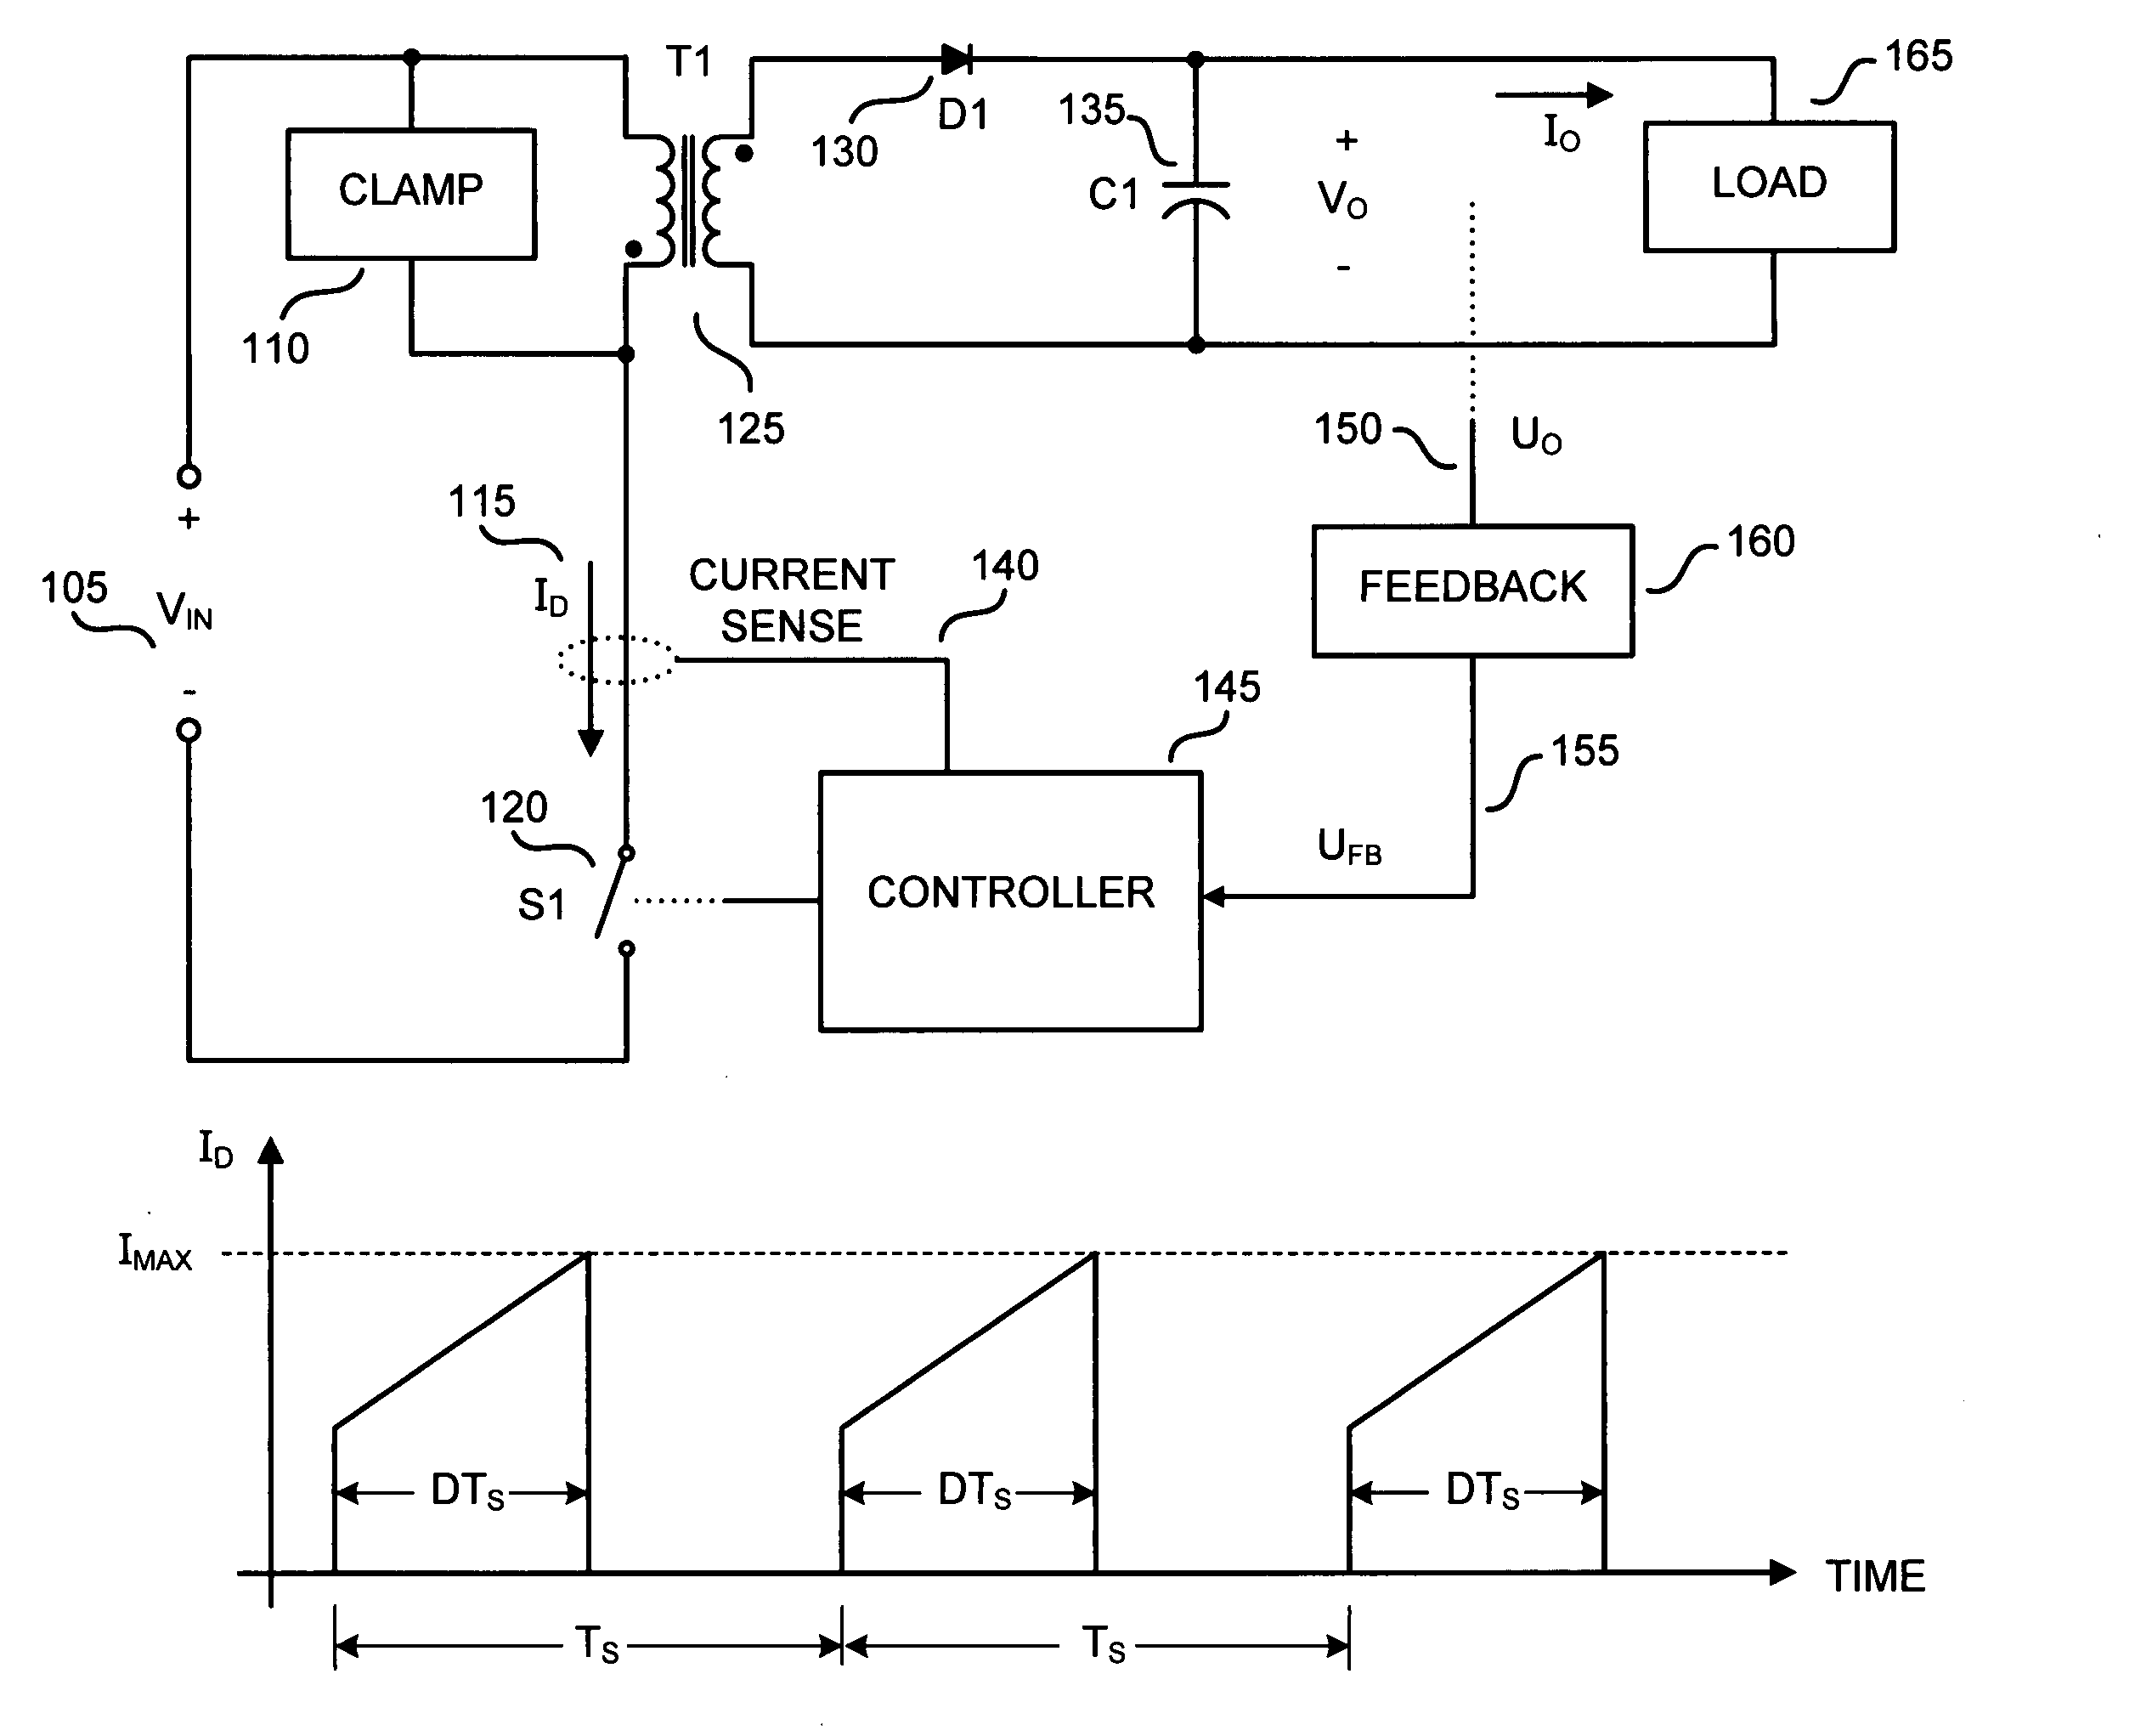 Method and apparatus to control output power from a switching power supply